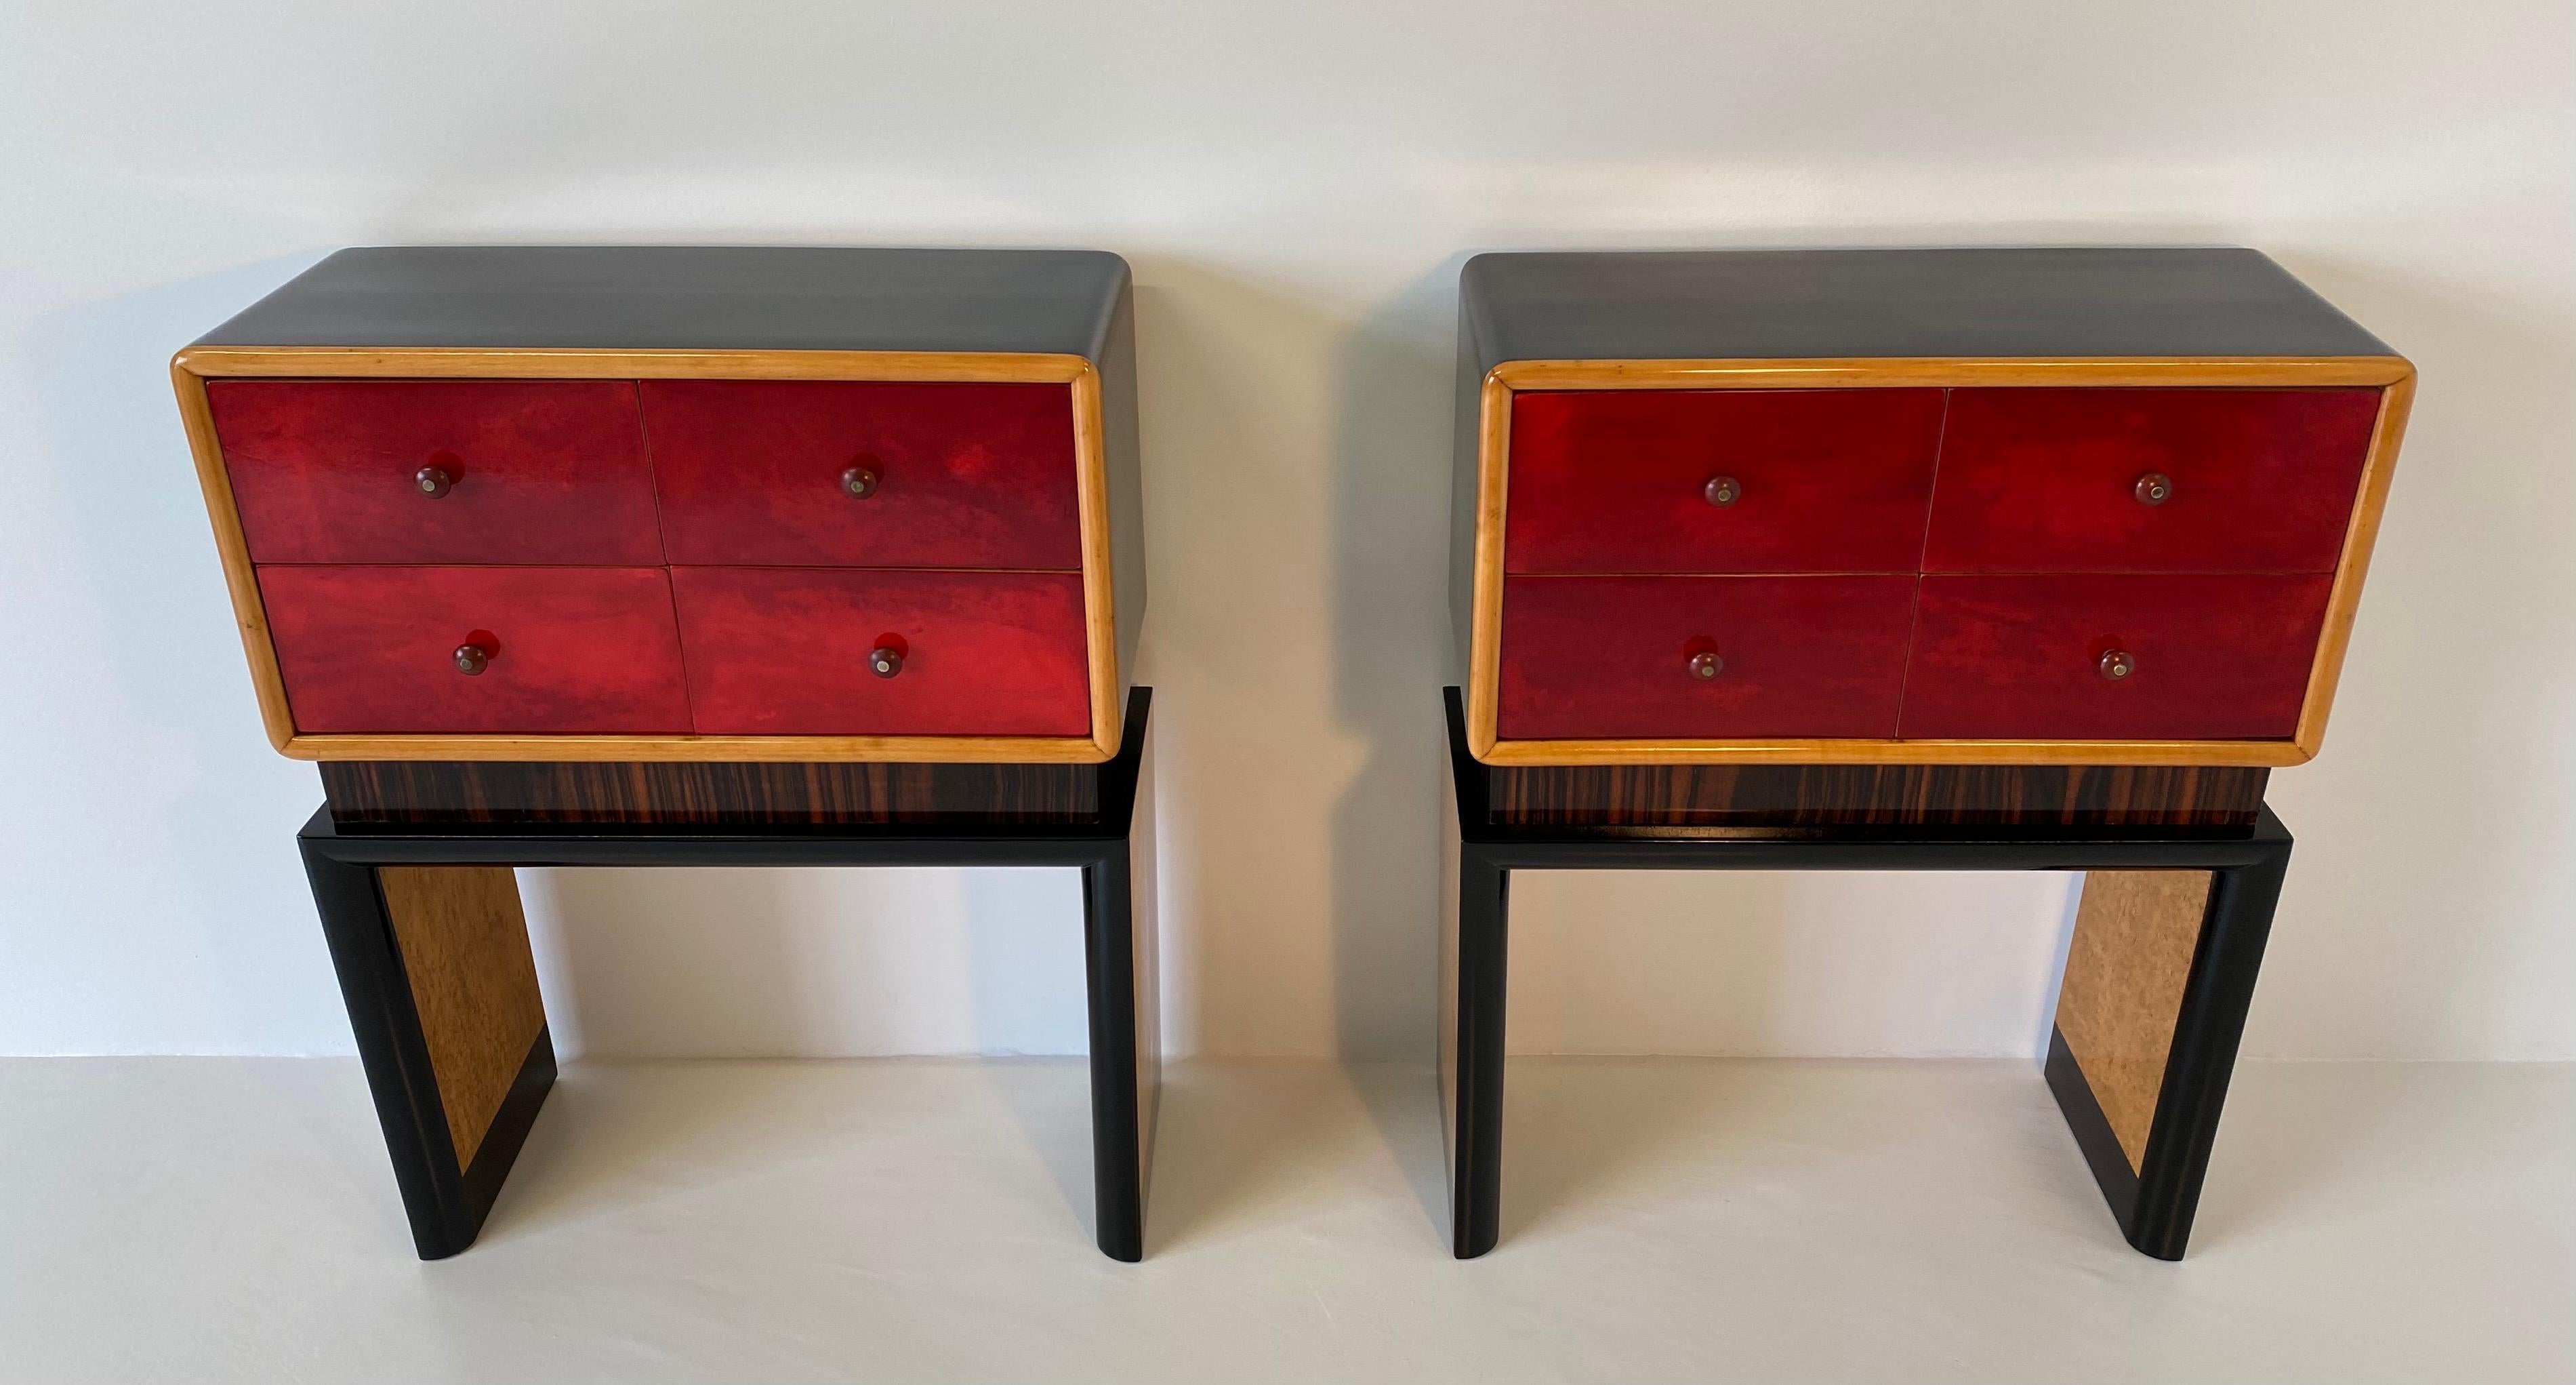 These rare and unique twin chest of drawers were produced in Italy in the 1950s.
The front of the drawers are covered in cherry red parchment while the base is in maple burl.
The structure and profiles are black lacquered and the central column is